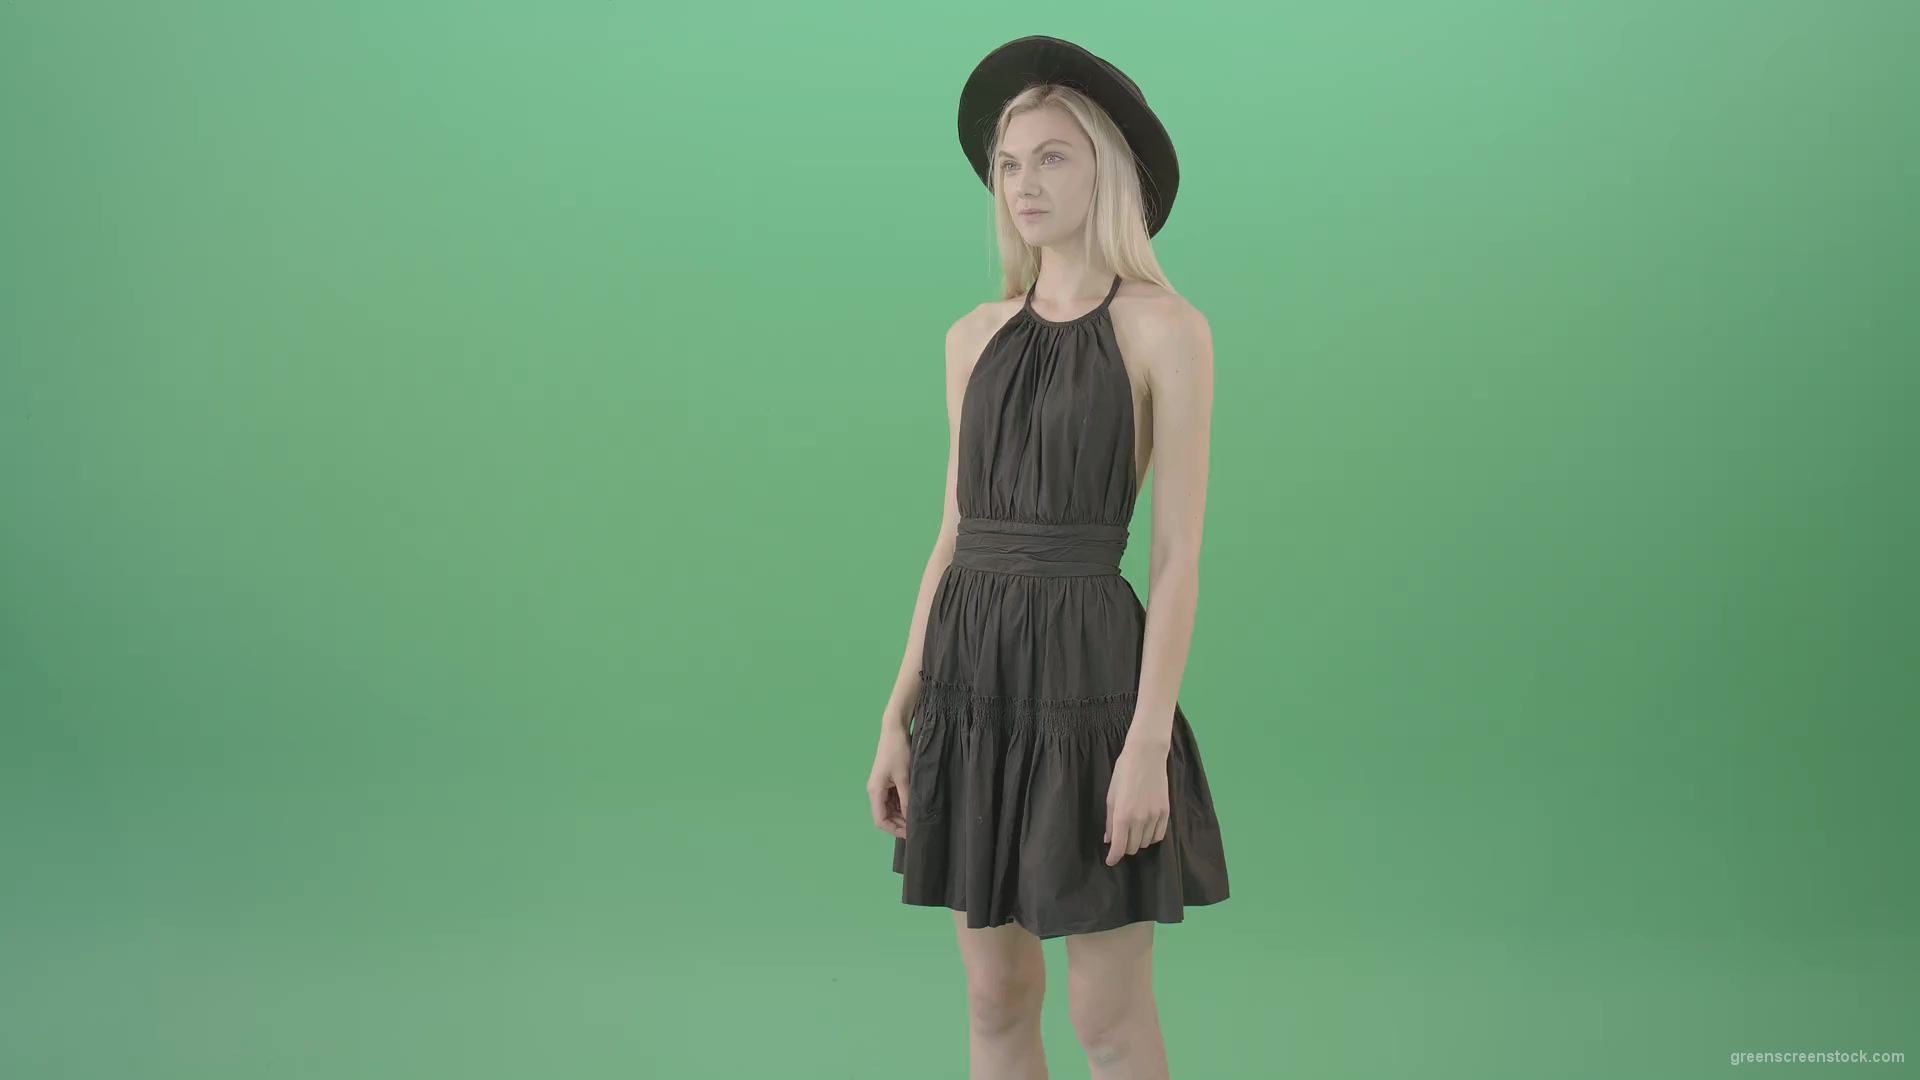 Happy-wow-effect-blonde-girl-slides-products-on-internet-on-touch-screen-4K-Green-Screen-Video-Footage-1920_001 Green Screen Stock